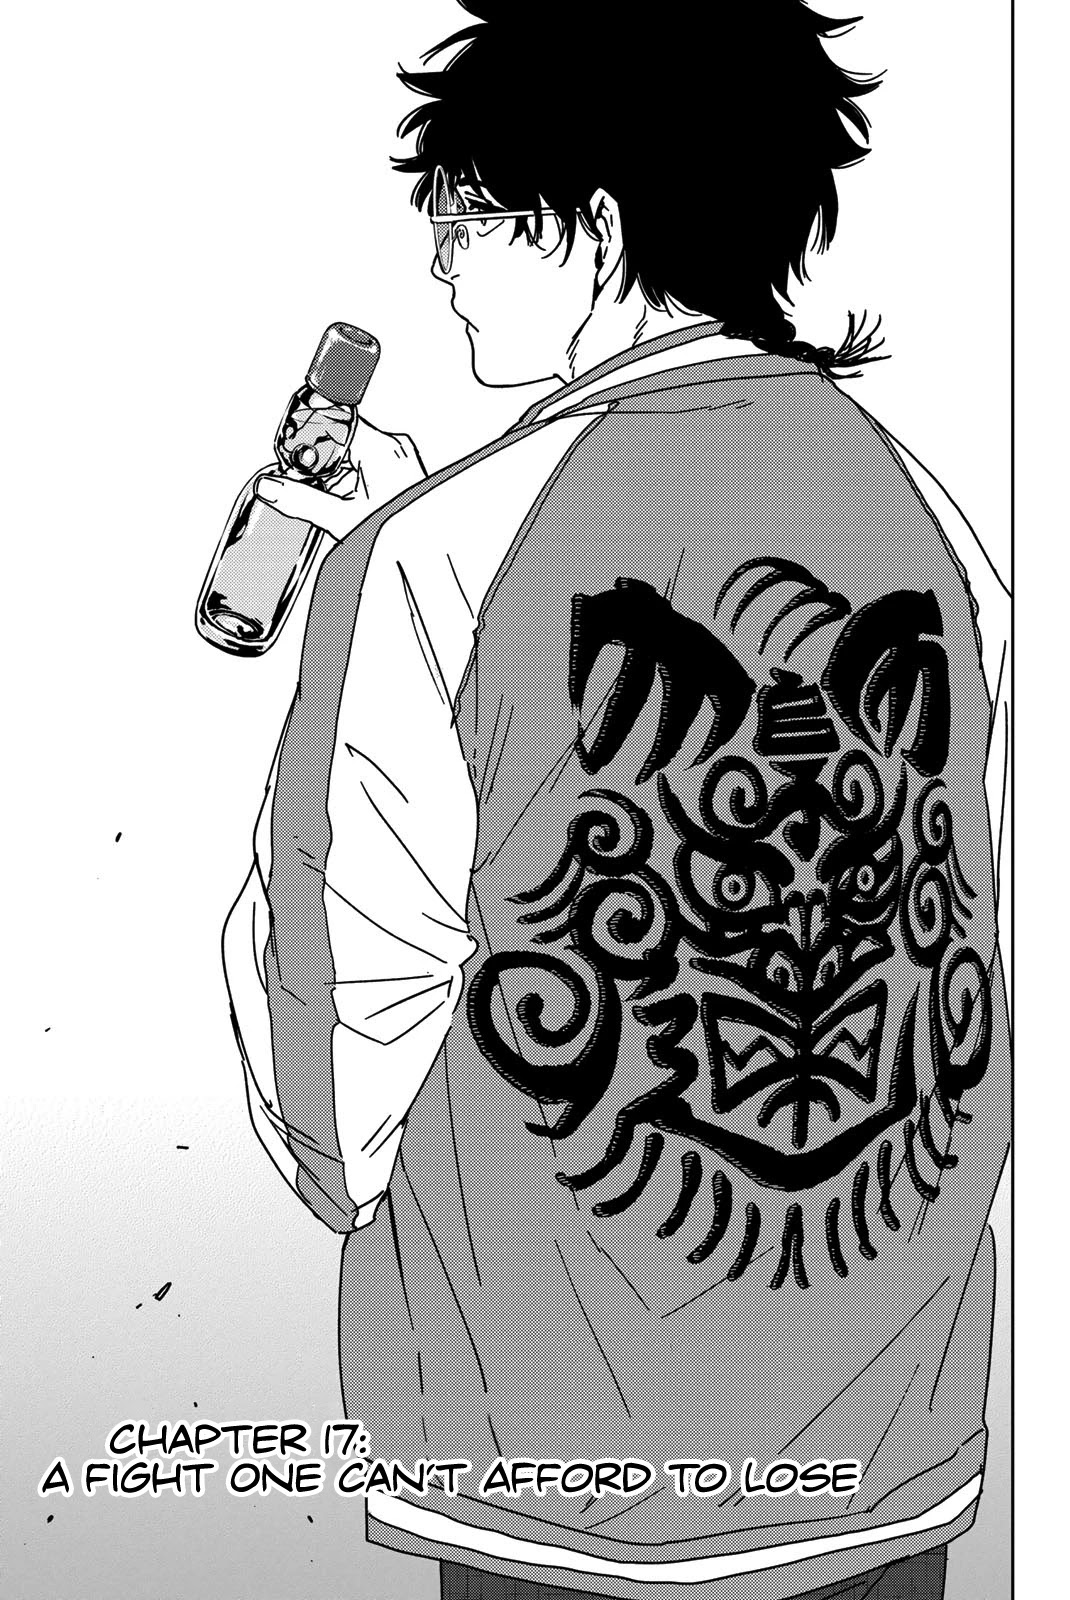 Wind Breaker (Nii Satoru) Chapter 17: A Fight One Can't Afford To Loose - Picture 1